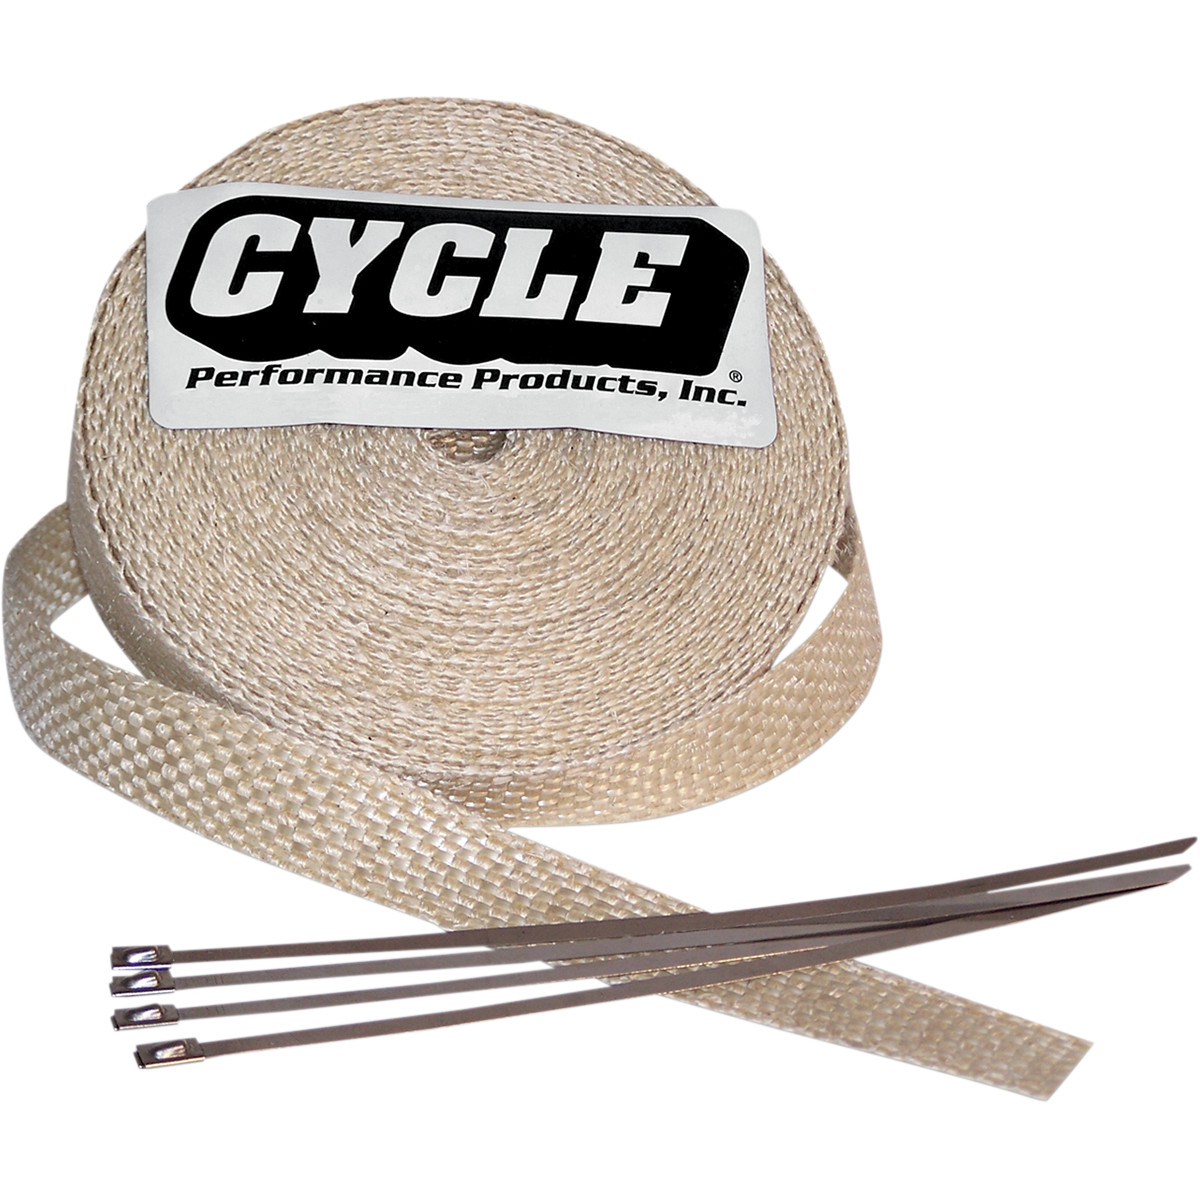 HARLEY DAVIDSON CYCLE PERFORMANCE WRAP KIT EXHAUST 2" X 25' WITH TIE NATURAL/STAINLESS